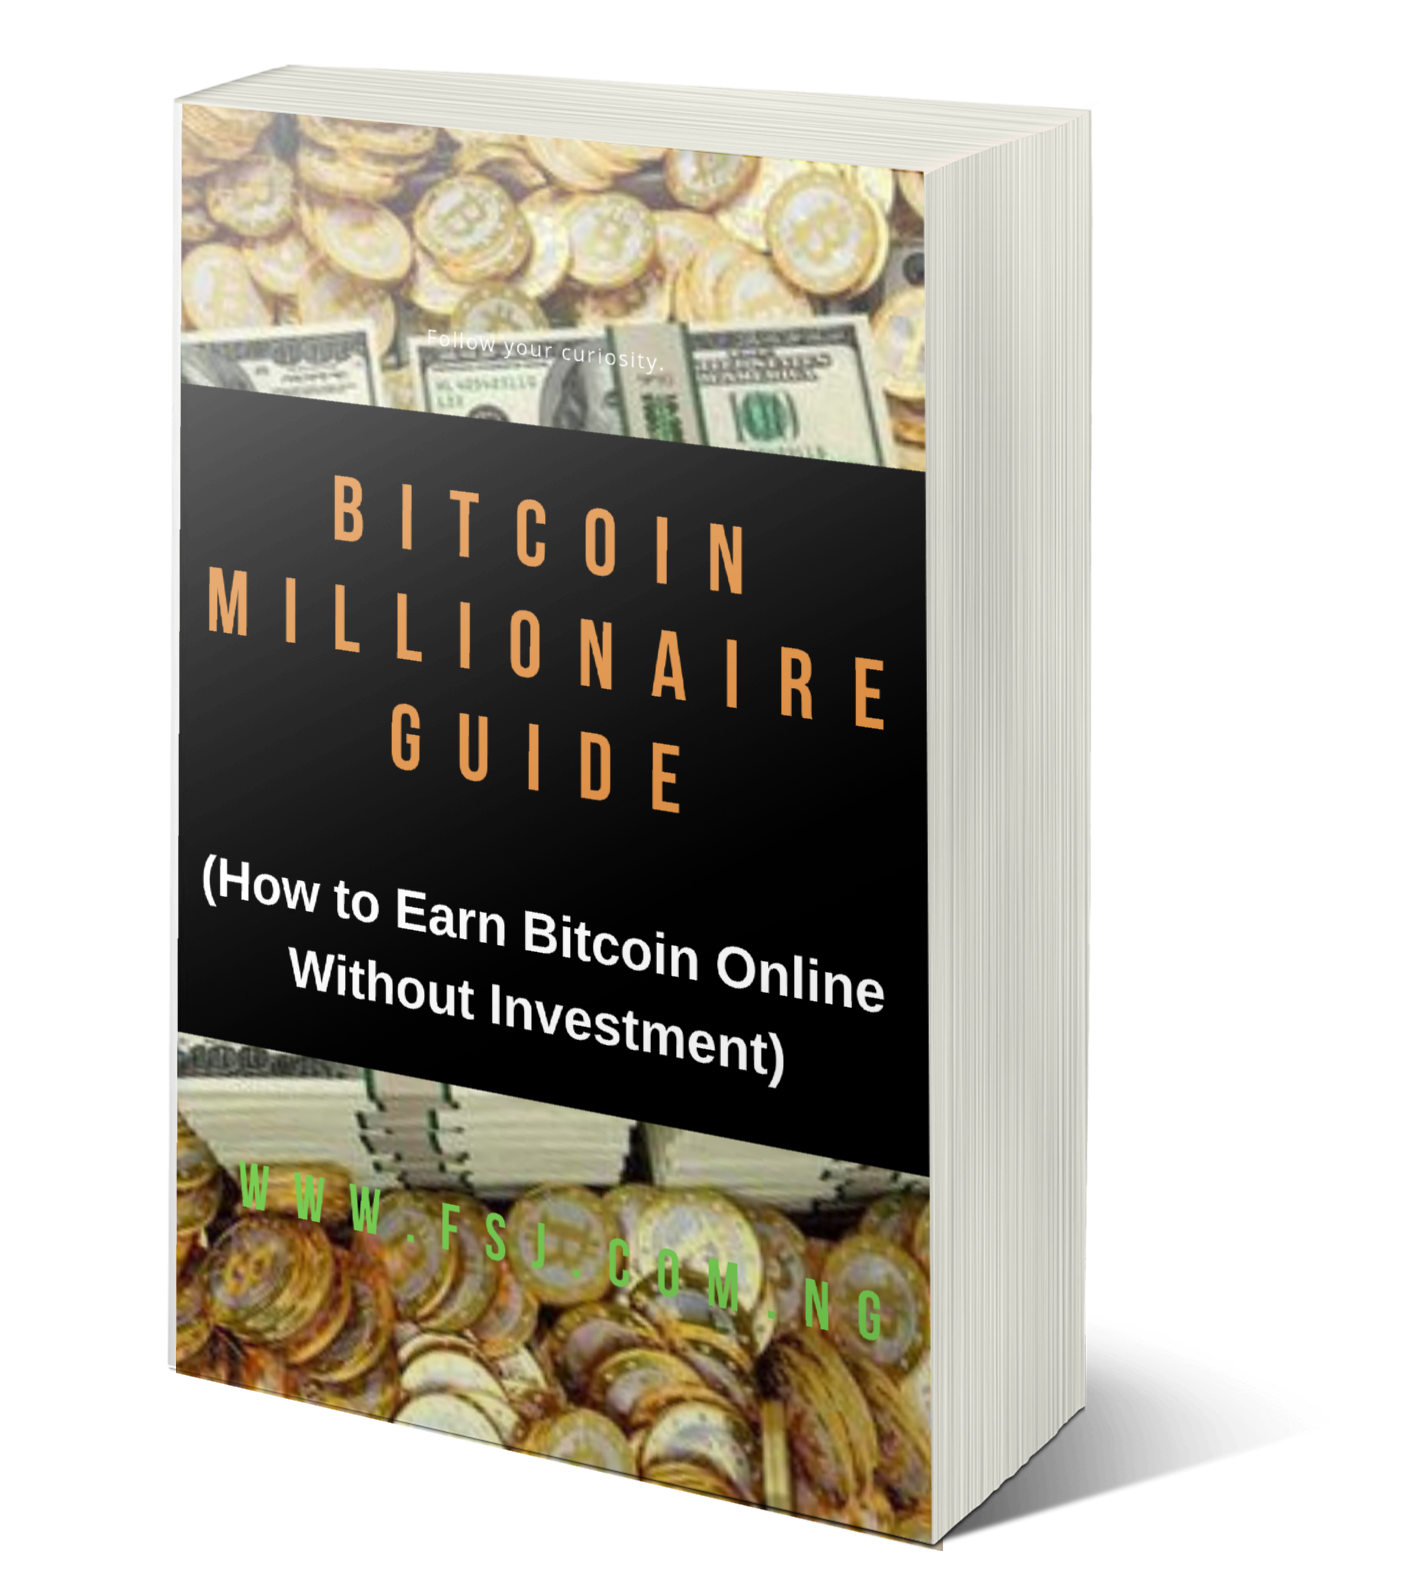 Bitcoin Millionaire Guide Free Download Fusionspring Journal - 